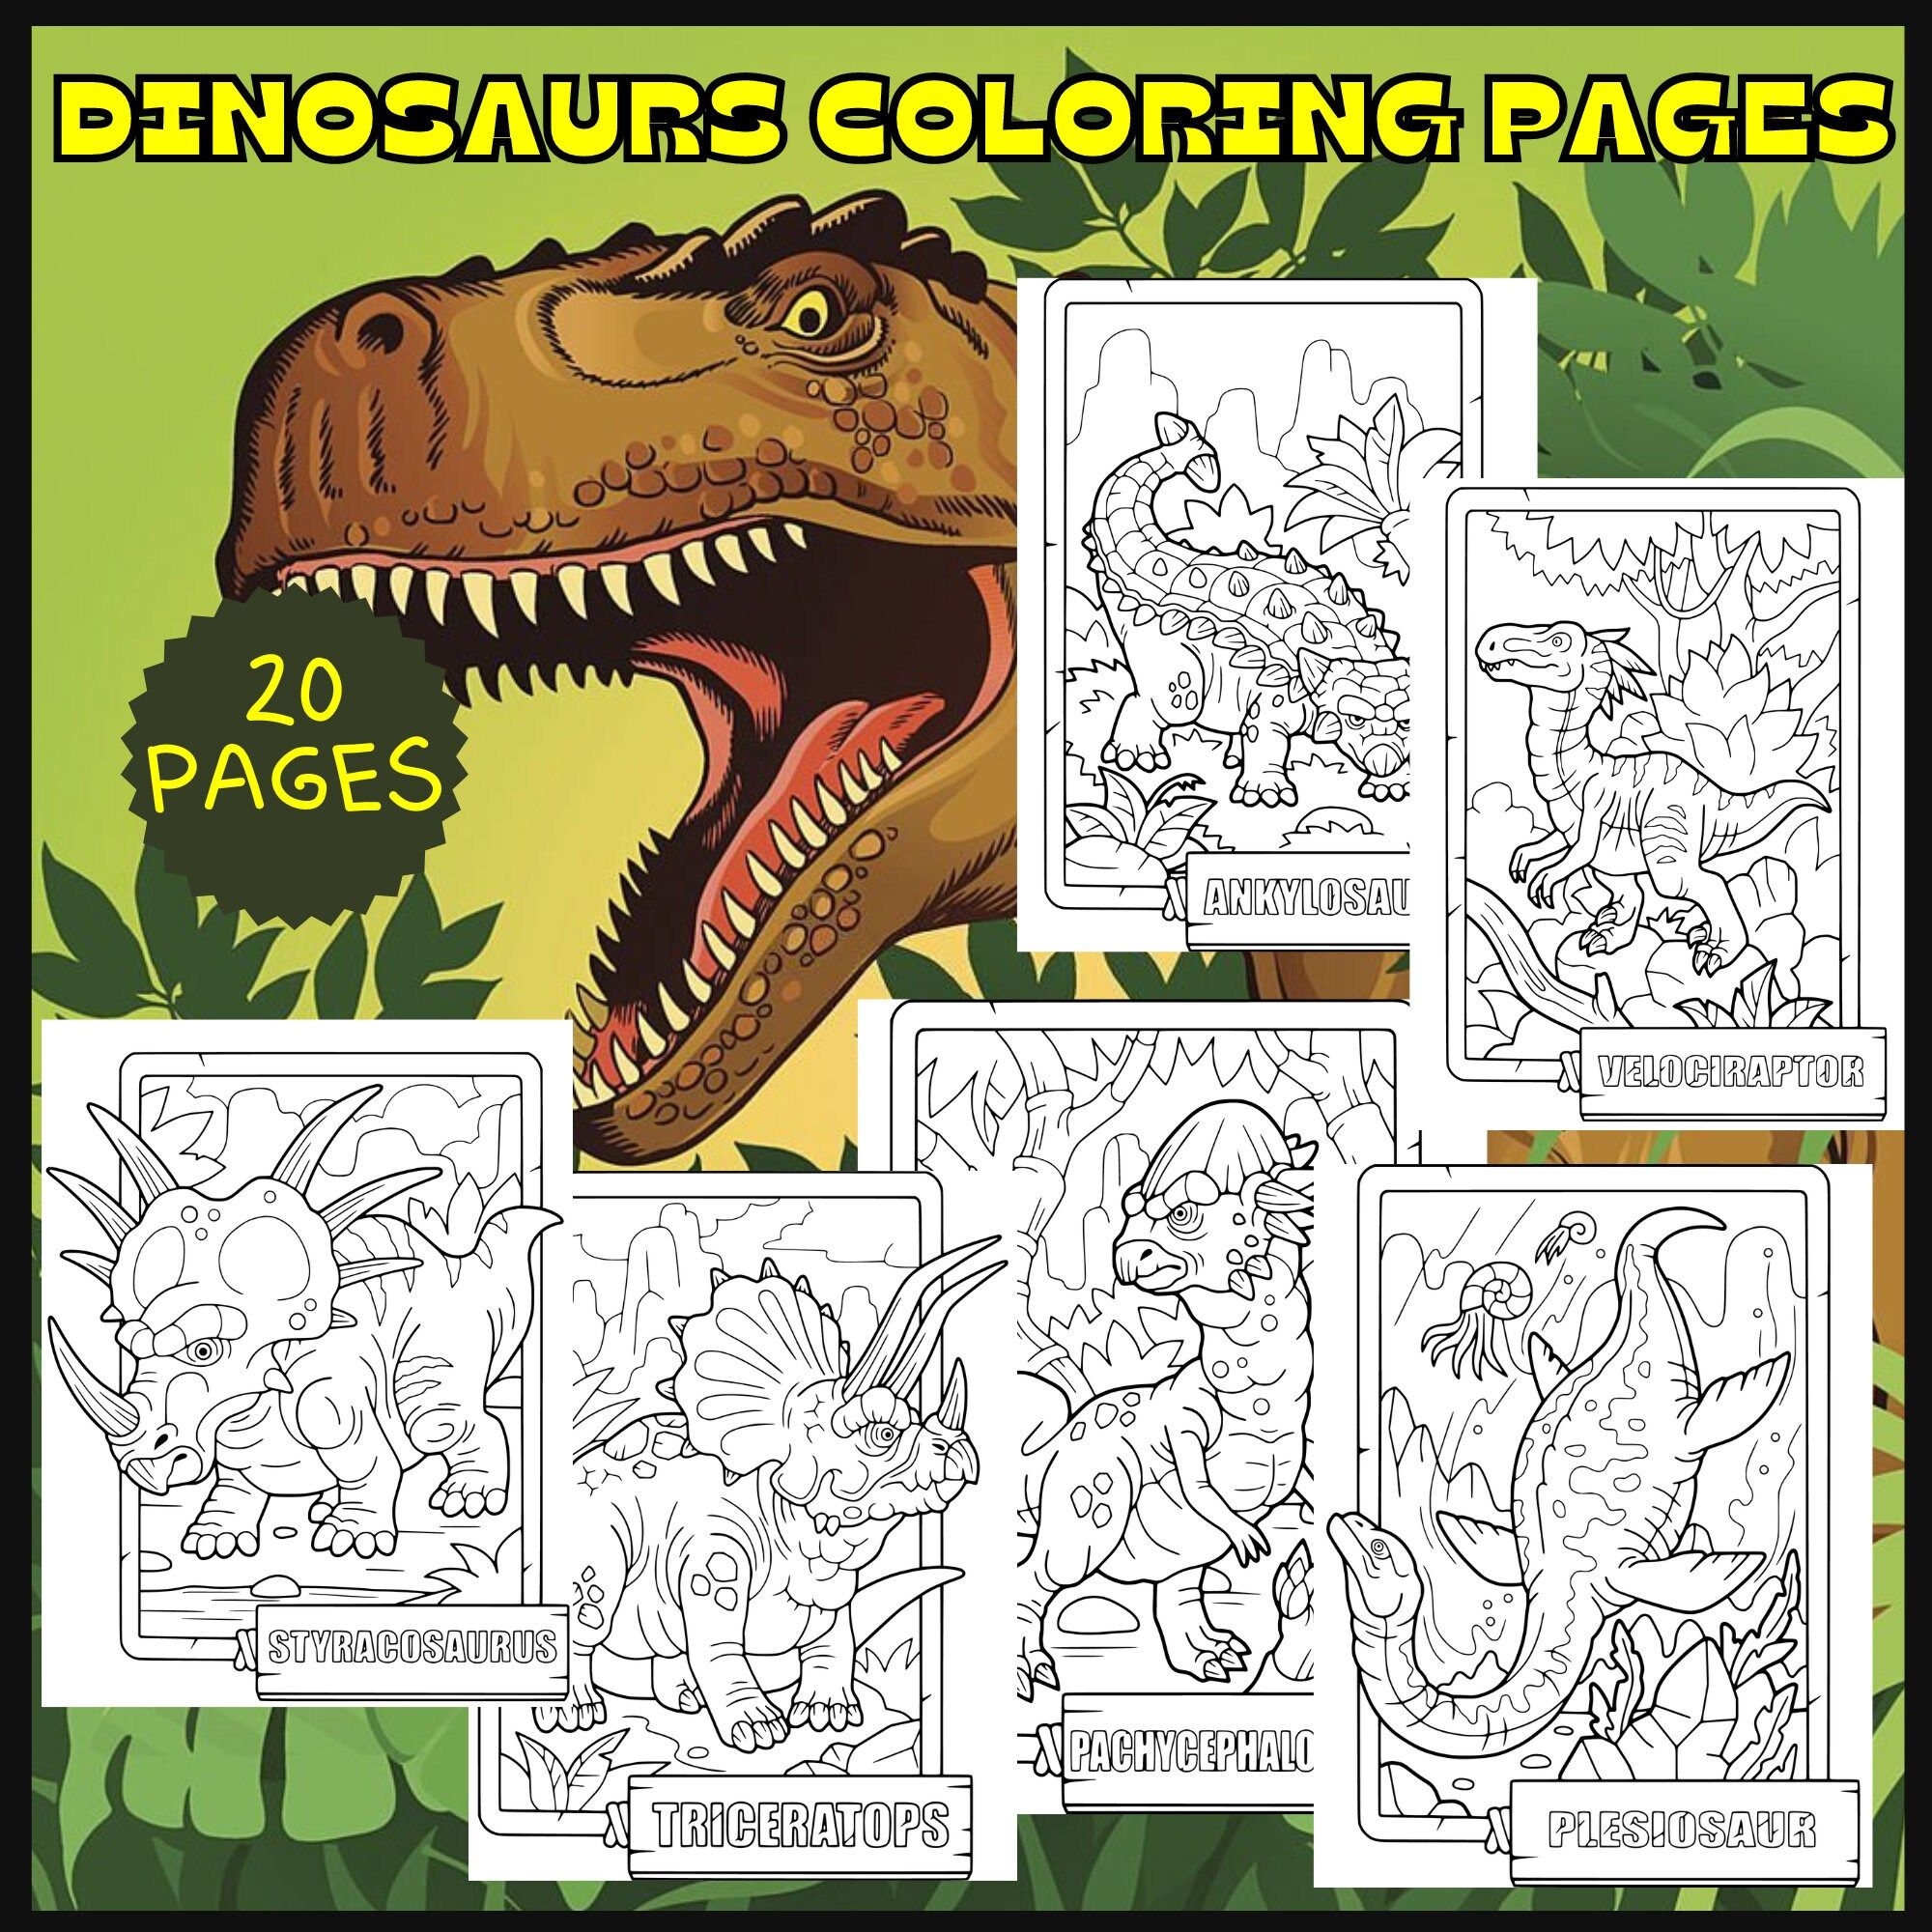 Dinosaur Coloring Pages| Kids Coloring Pages Dinosaur | printable dinosaur coloring pages | Dinosaur Birthday Party Activity| DIGITAL | PDF